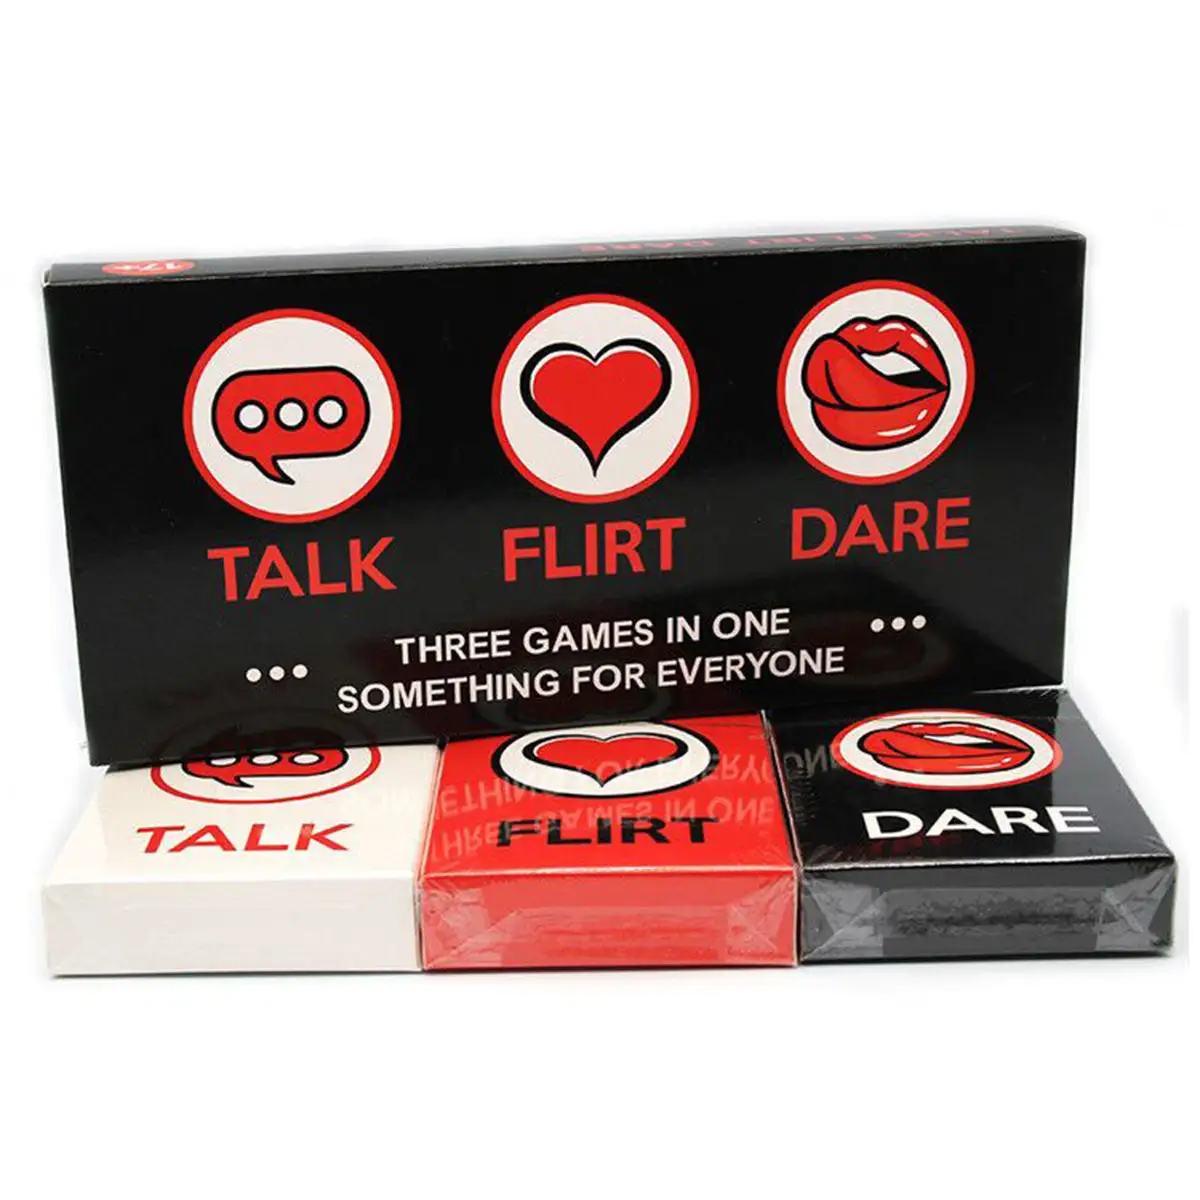 Couple Romantic Cards Talk Sets Sexy Card Games Playing Fun Adult Game Sex Toys Intimate